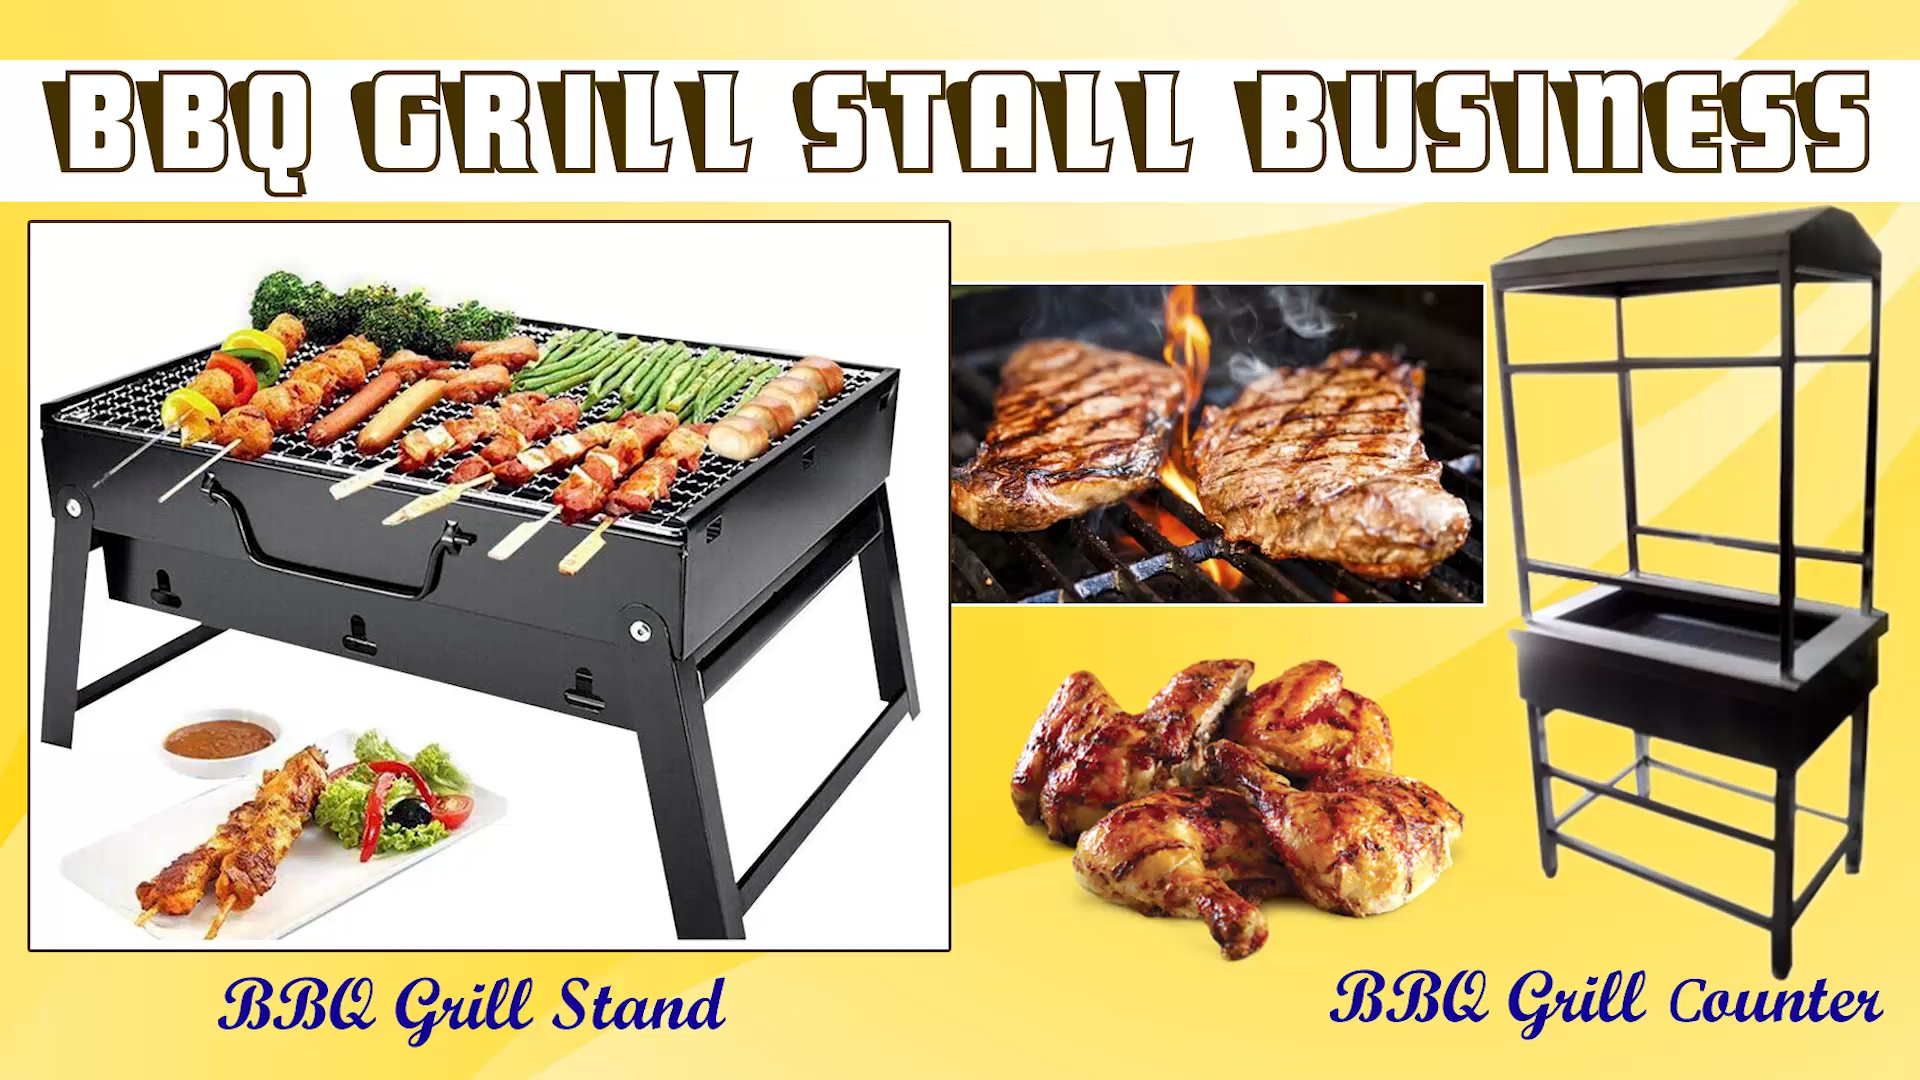 BBQ-grill-stall-business